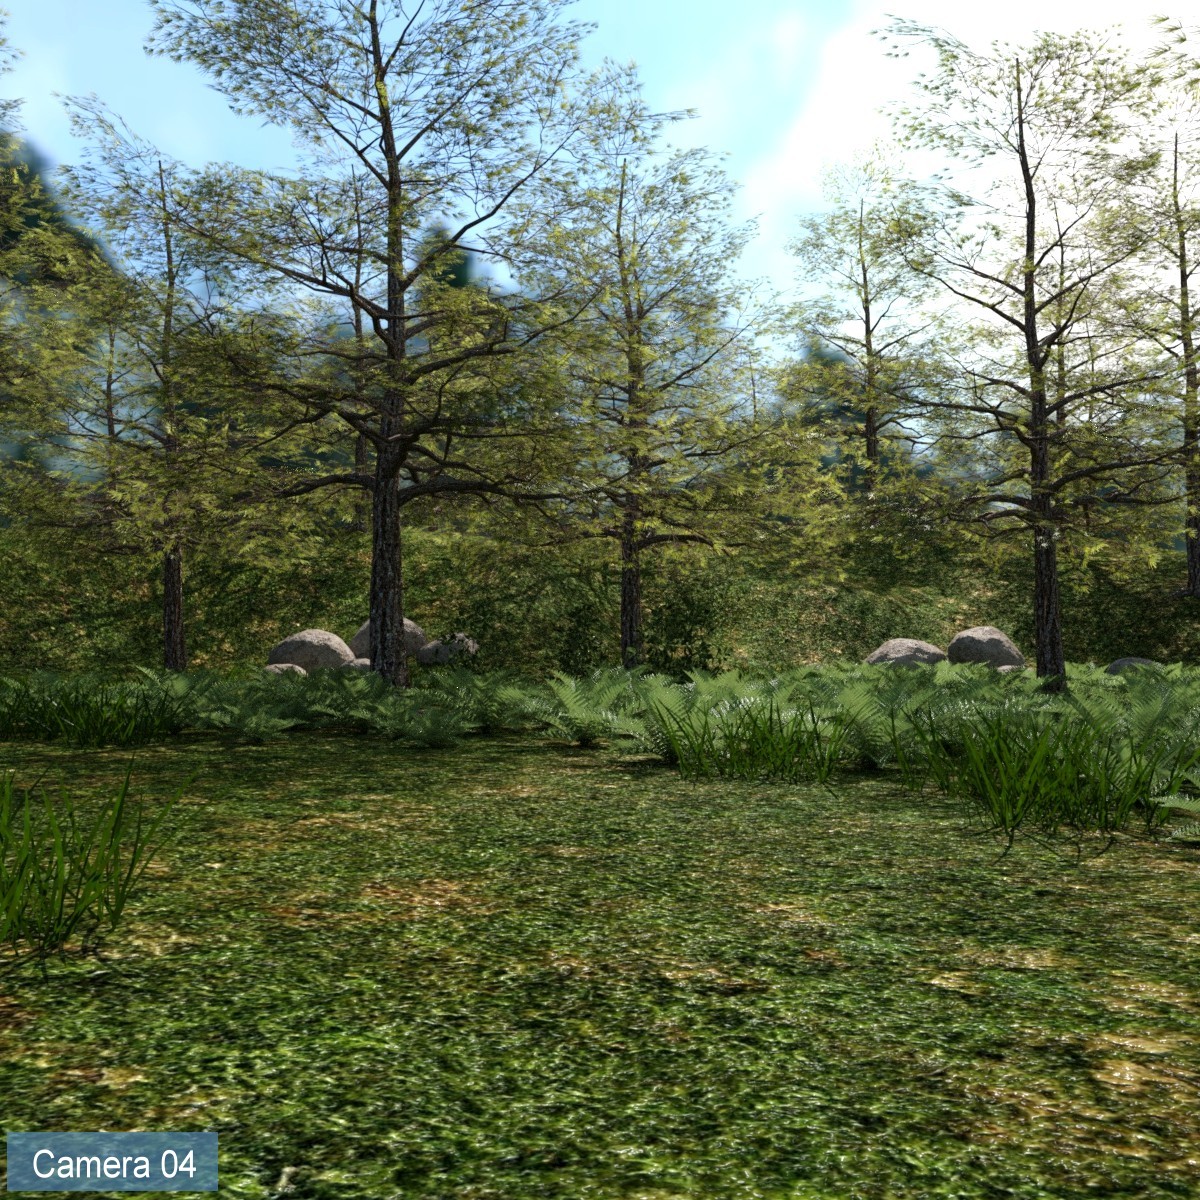 The Great Forest by: JeffersonAF, 3D Models by Daz 3D